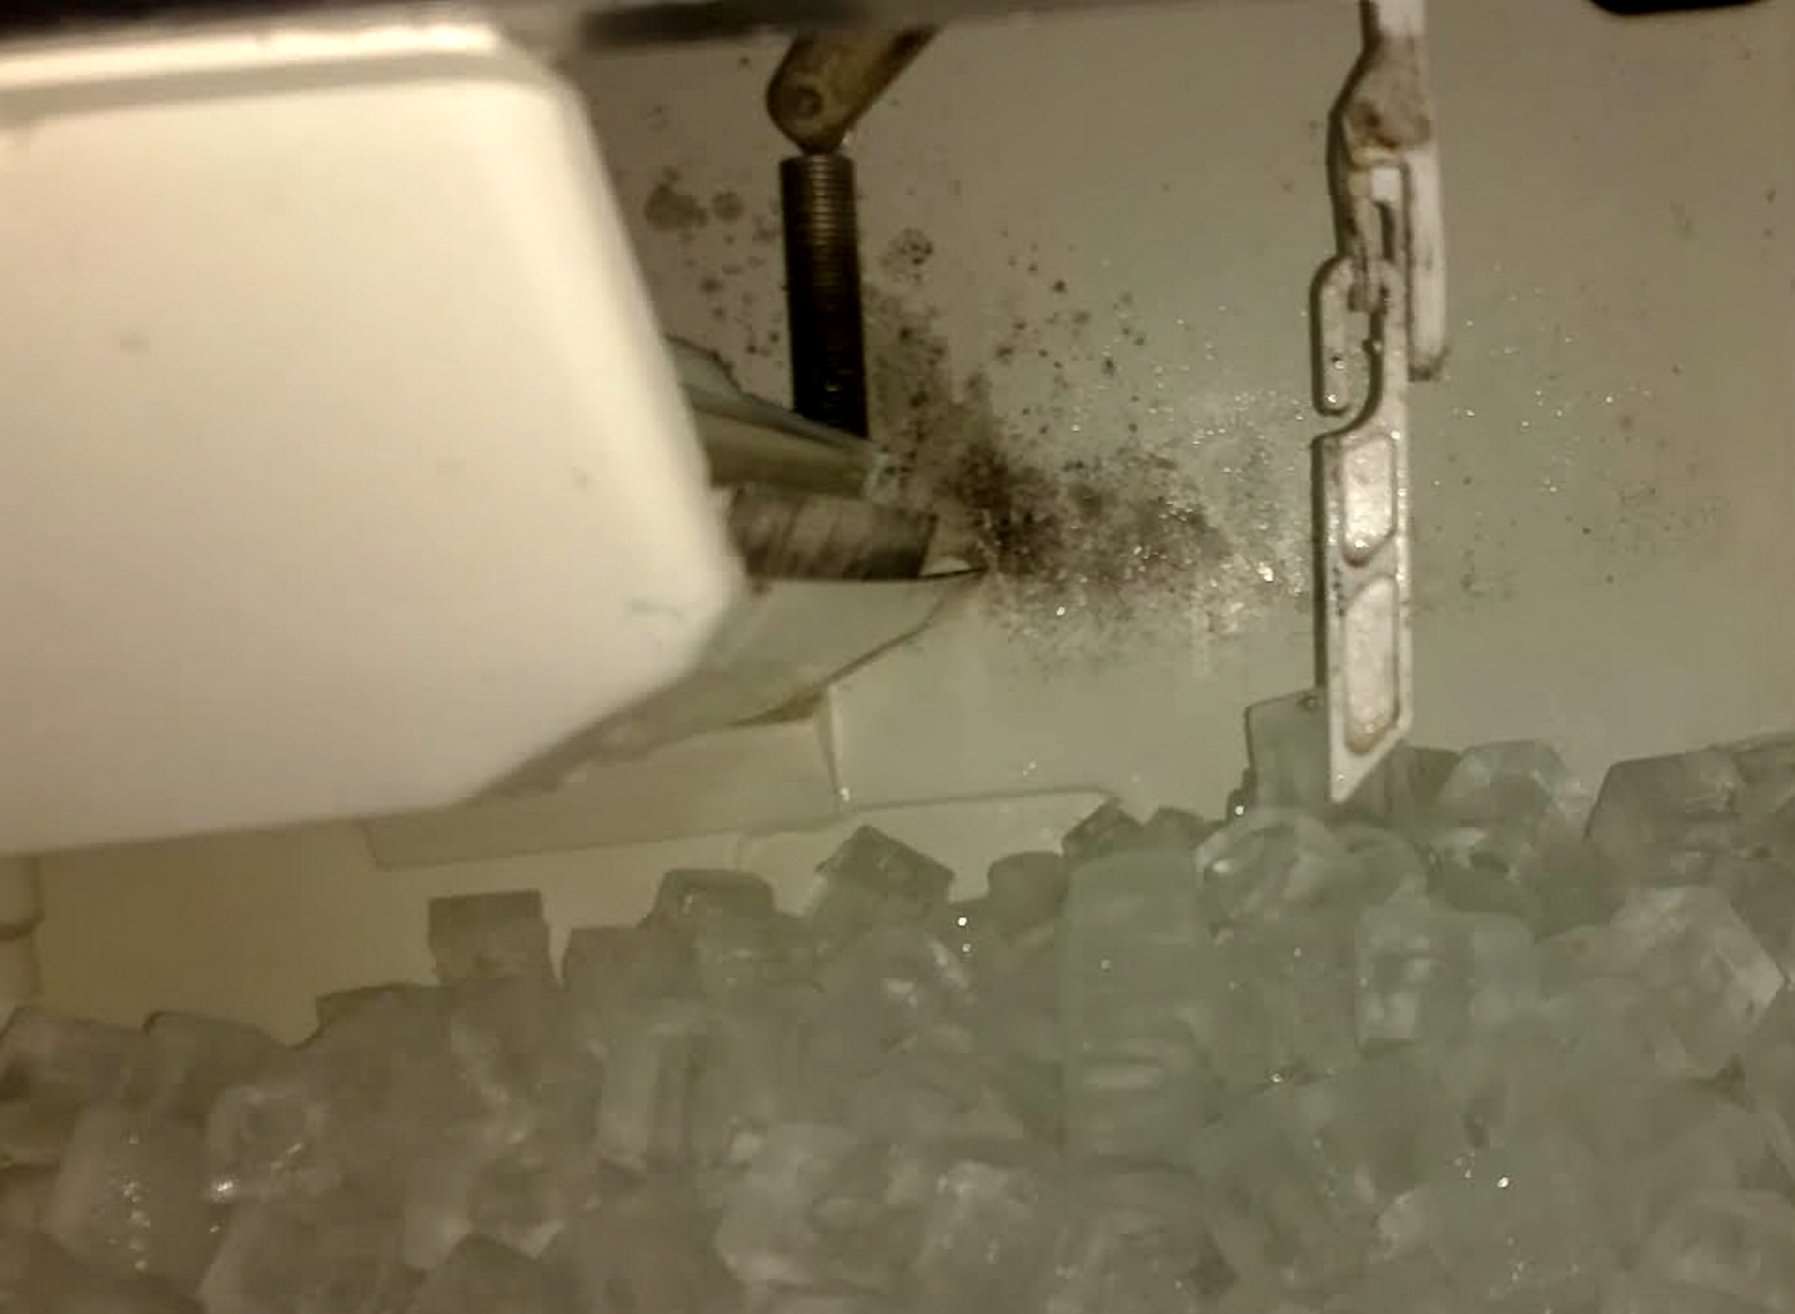 Mould can be seen in the fridge from where ice is served to guests. Picture: SWNS